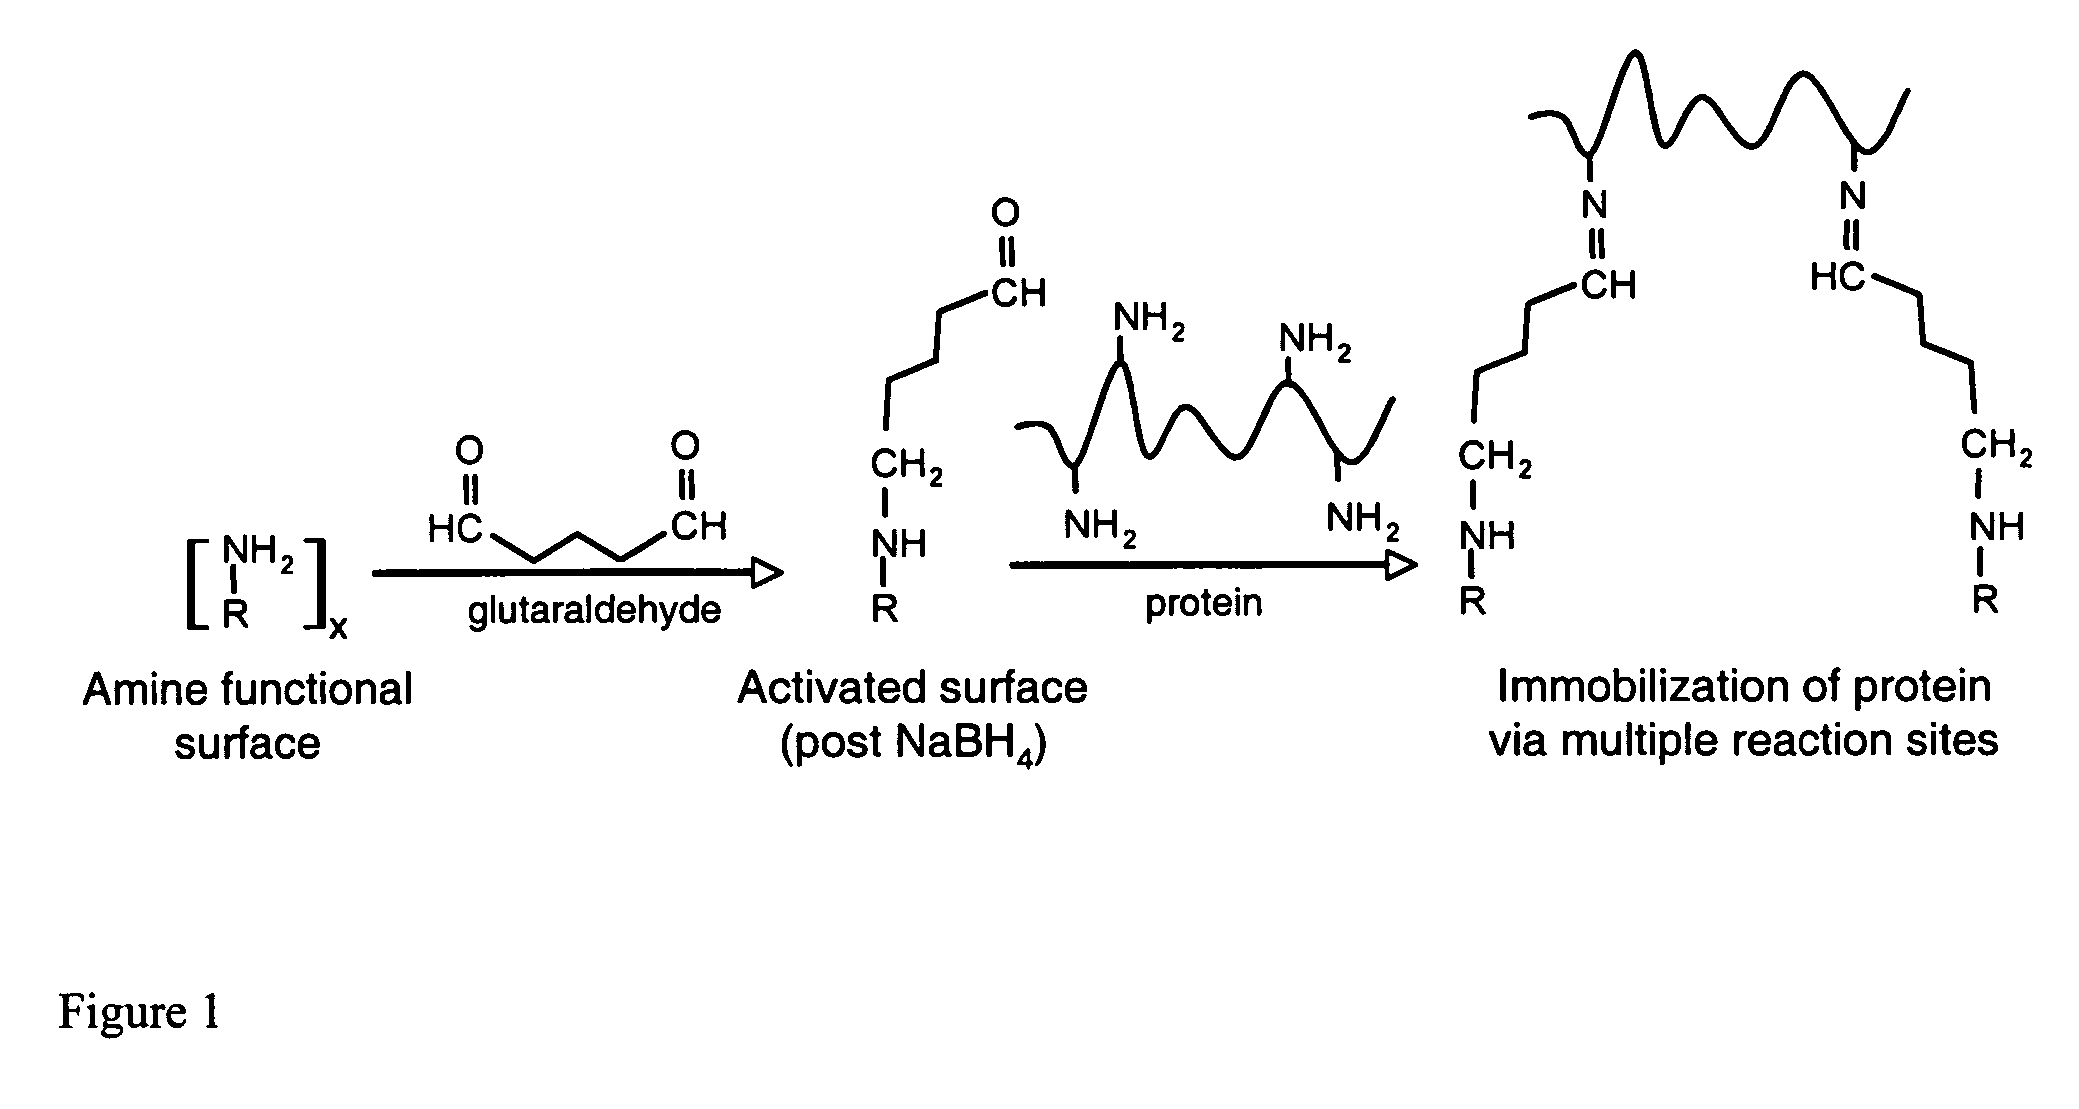 Affinity membrane for capture of a target biomolecule and formation thereof by site-directed immobilization of a capture biomolecule